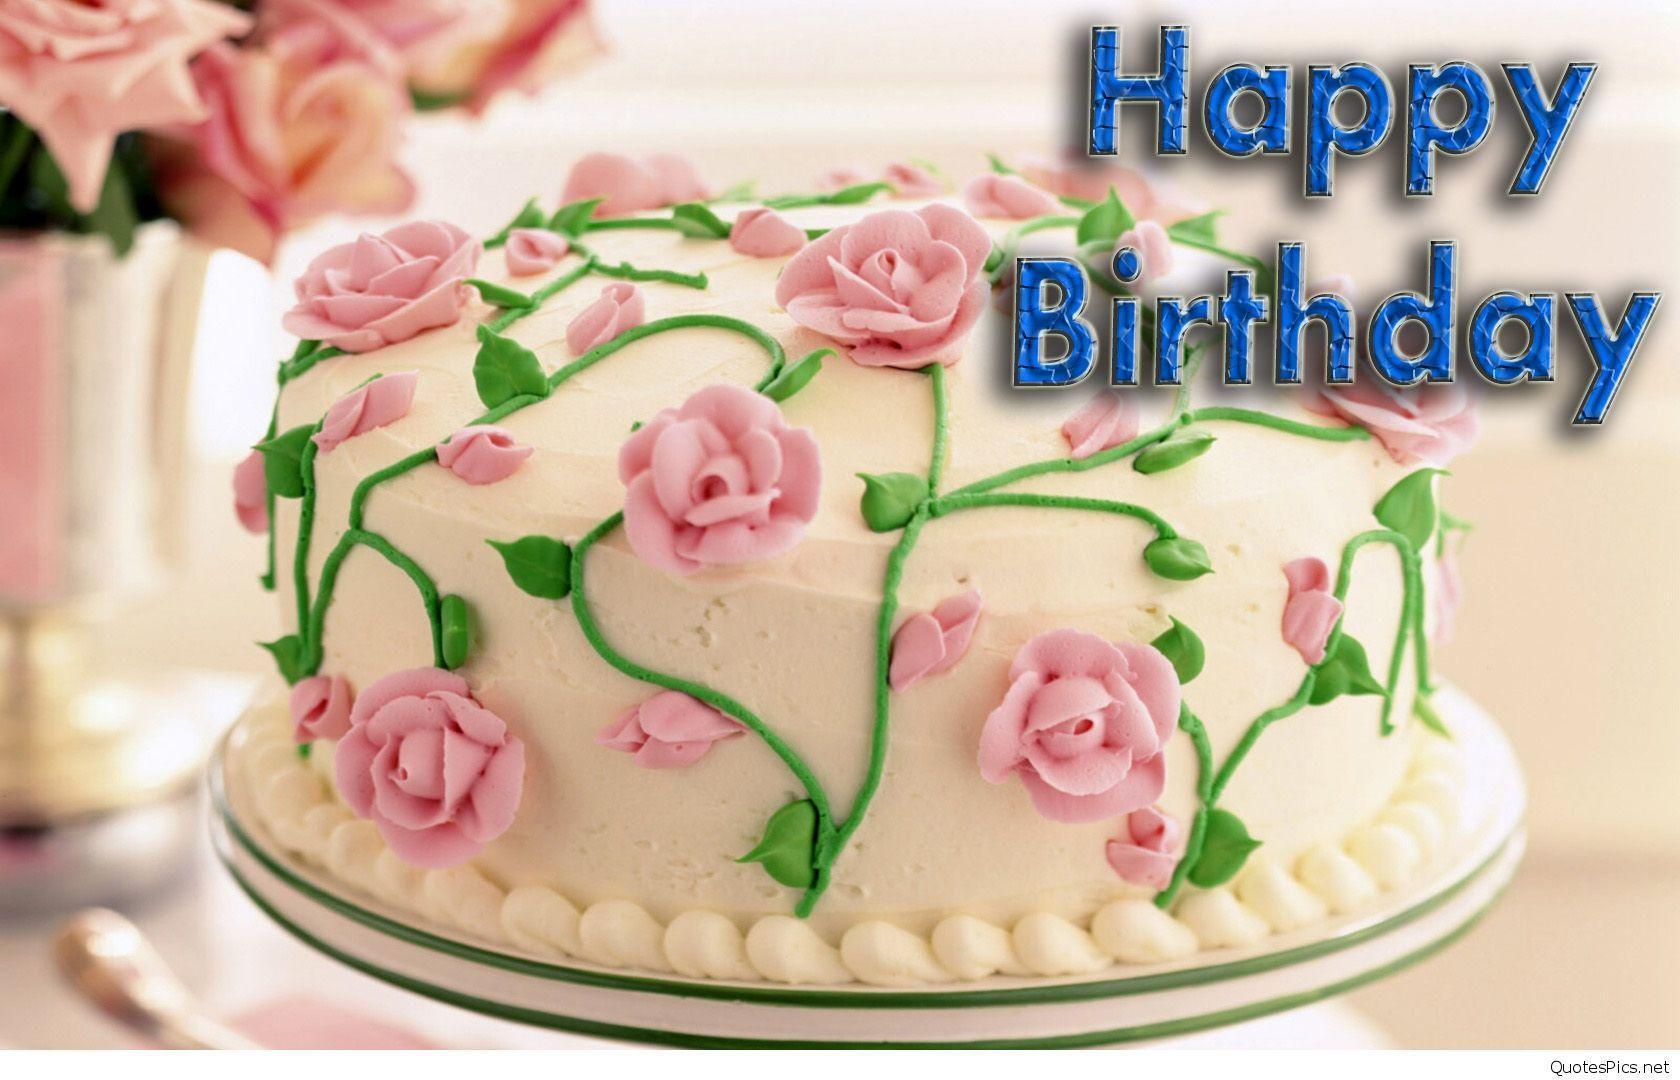 Birthday Cakes Wallpapers - Wp2039508